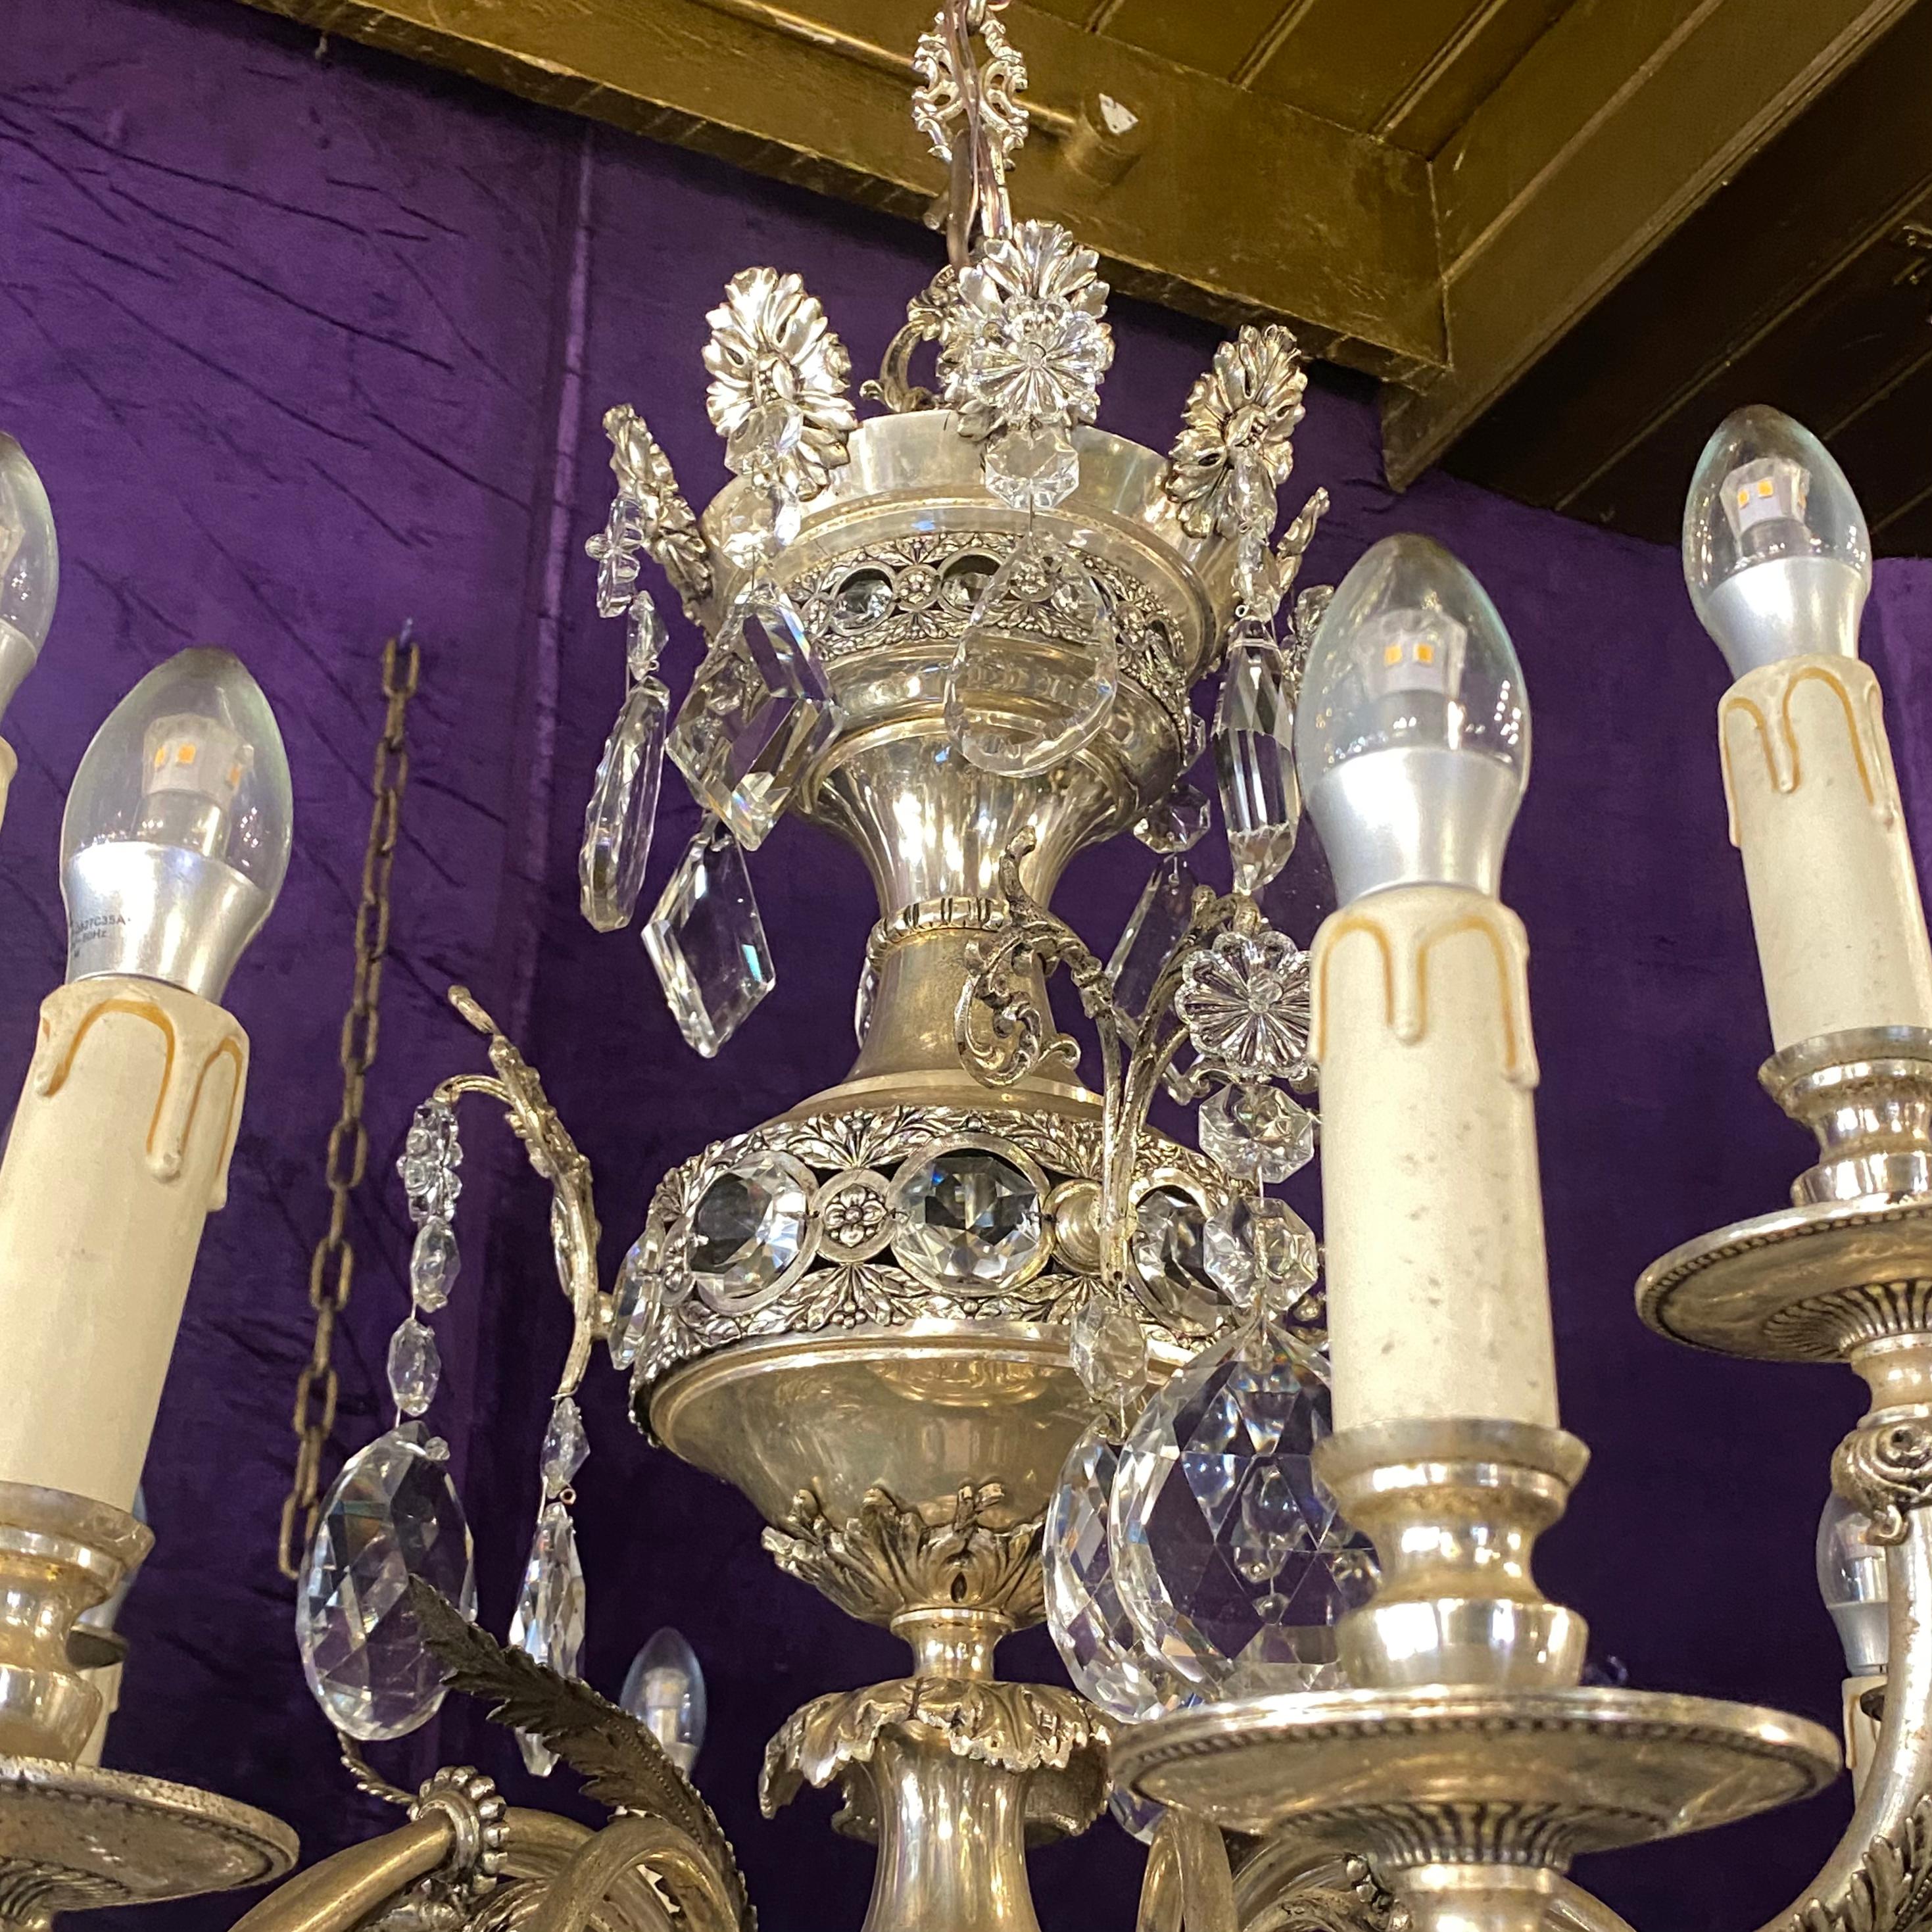 Beautiful Antique Mazarin Chandelier with Silver Plating